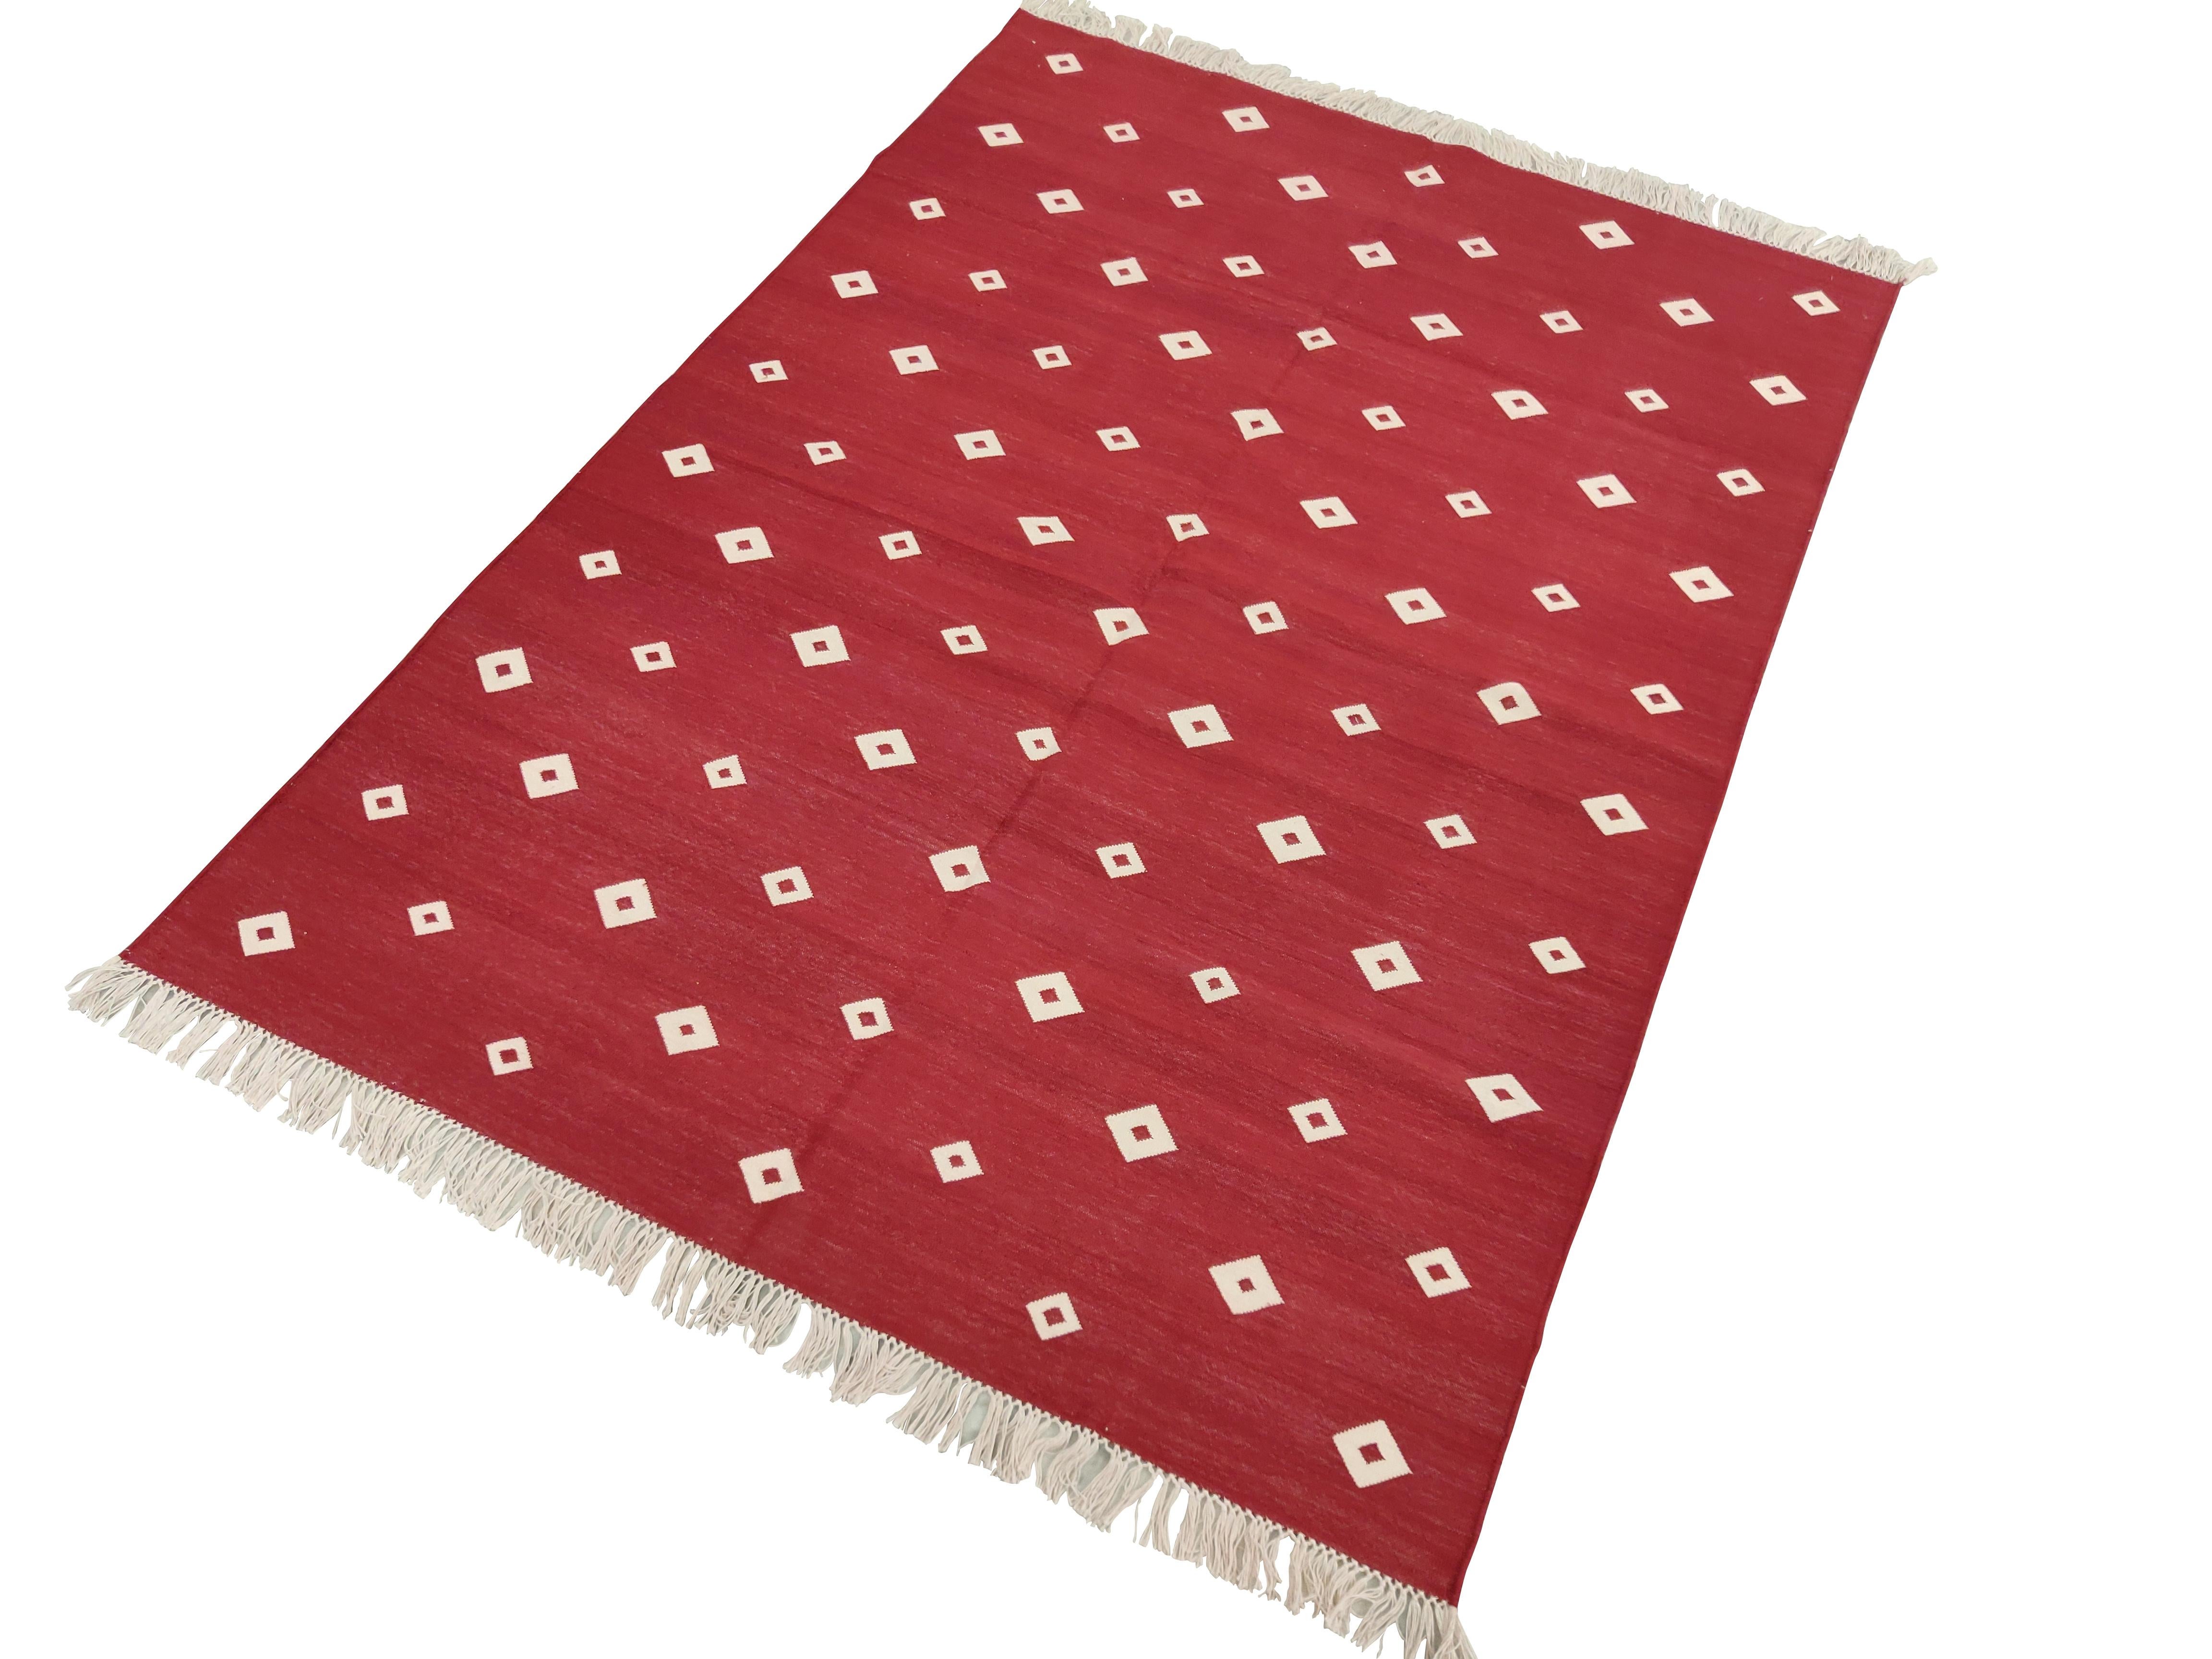 Cotton Vegetable Dyed Red And White Diamond Indian Dhurrie Rug-4'x6' 
These special flat-weave dhurries are hand-woven with 15 ply 100% cotton yarn. Due to the special manufacturing techniques used to create our rugs, the size and color of each